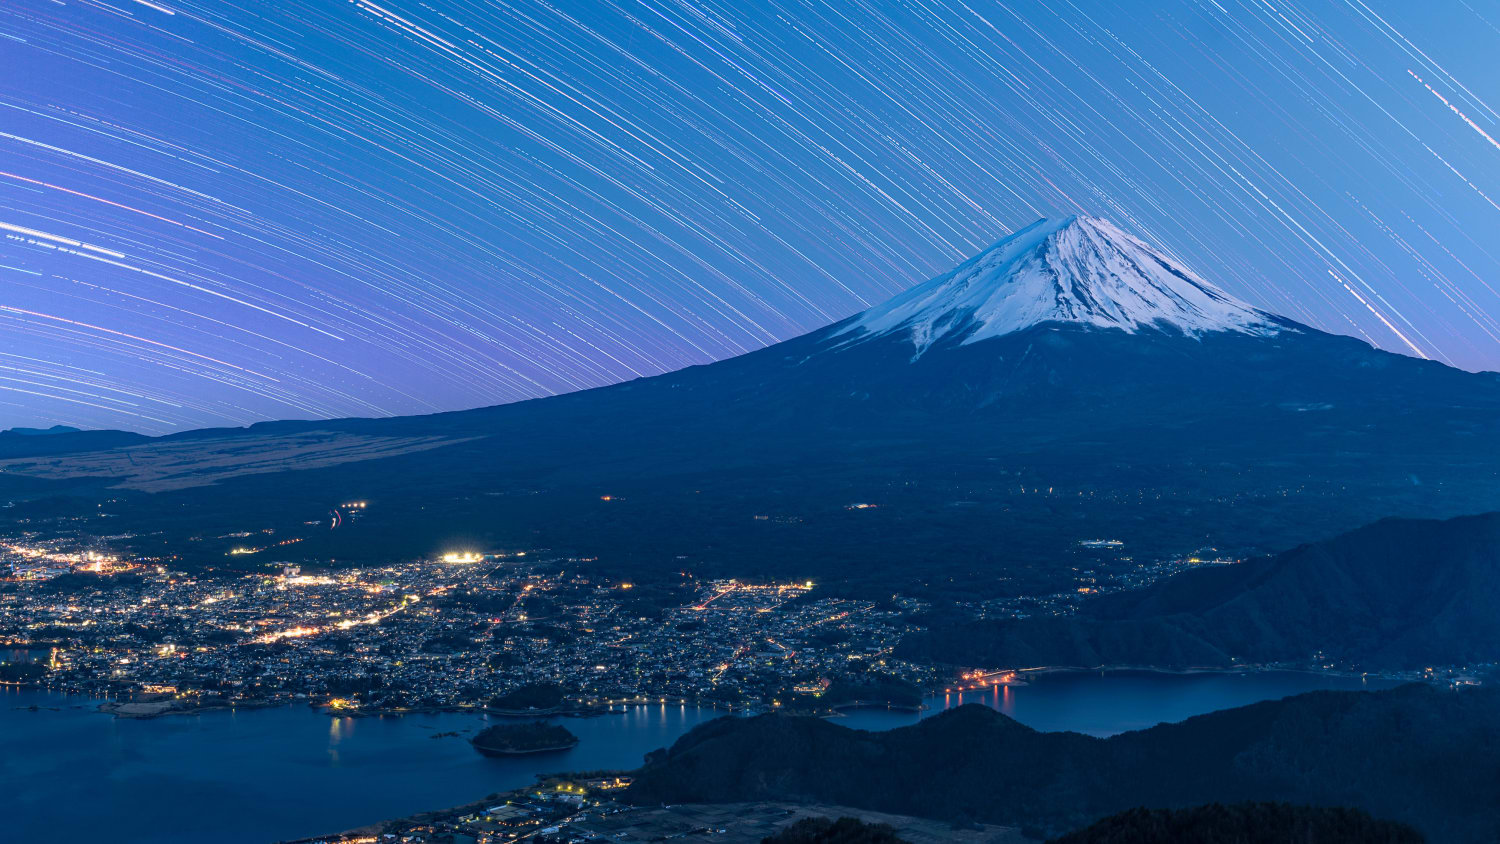 Mount Fuji with Star Trails